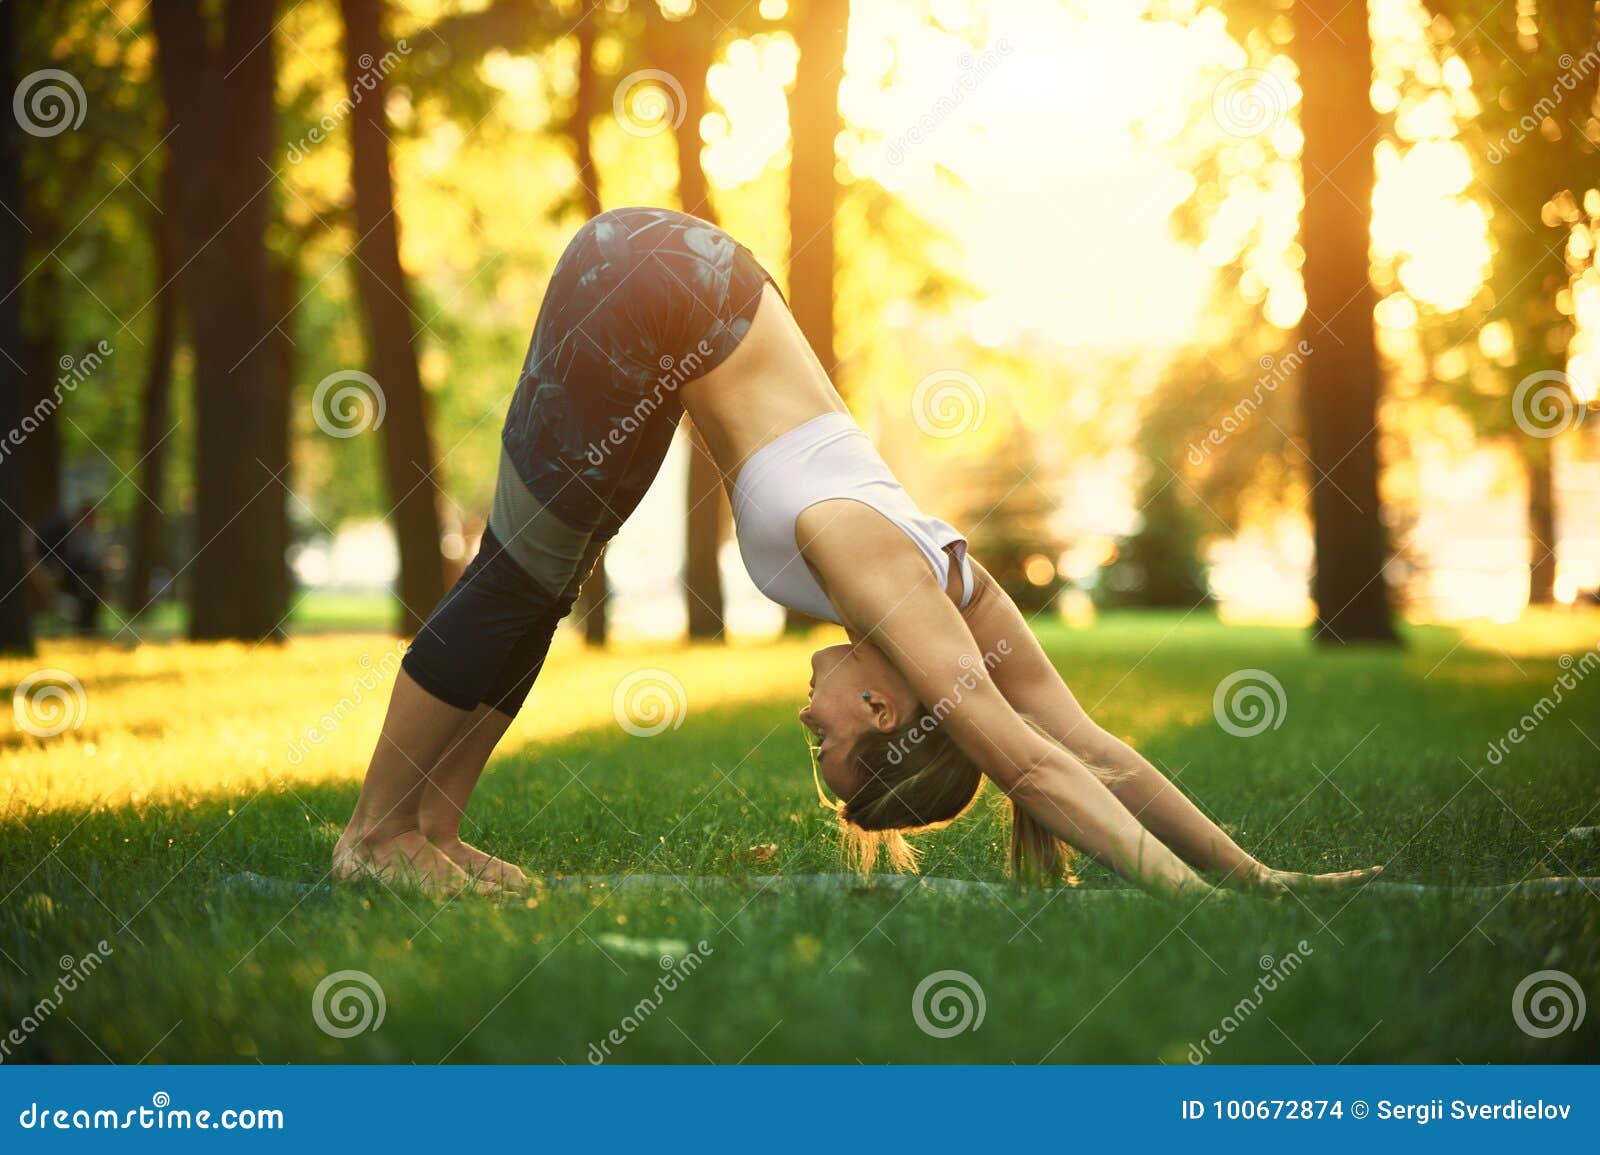 beautiful young woman practices yoga asana downward facing dog in the park at sunset